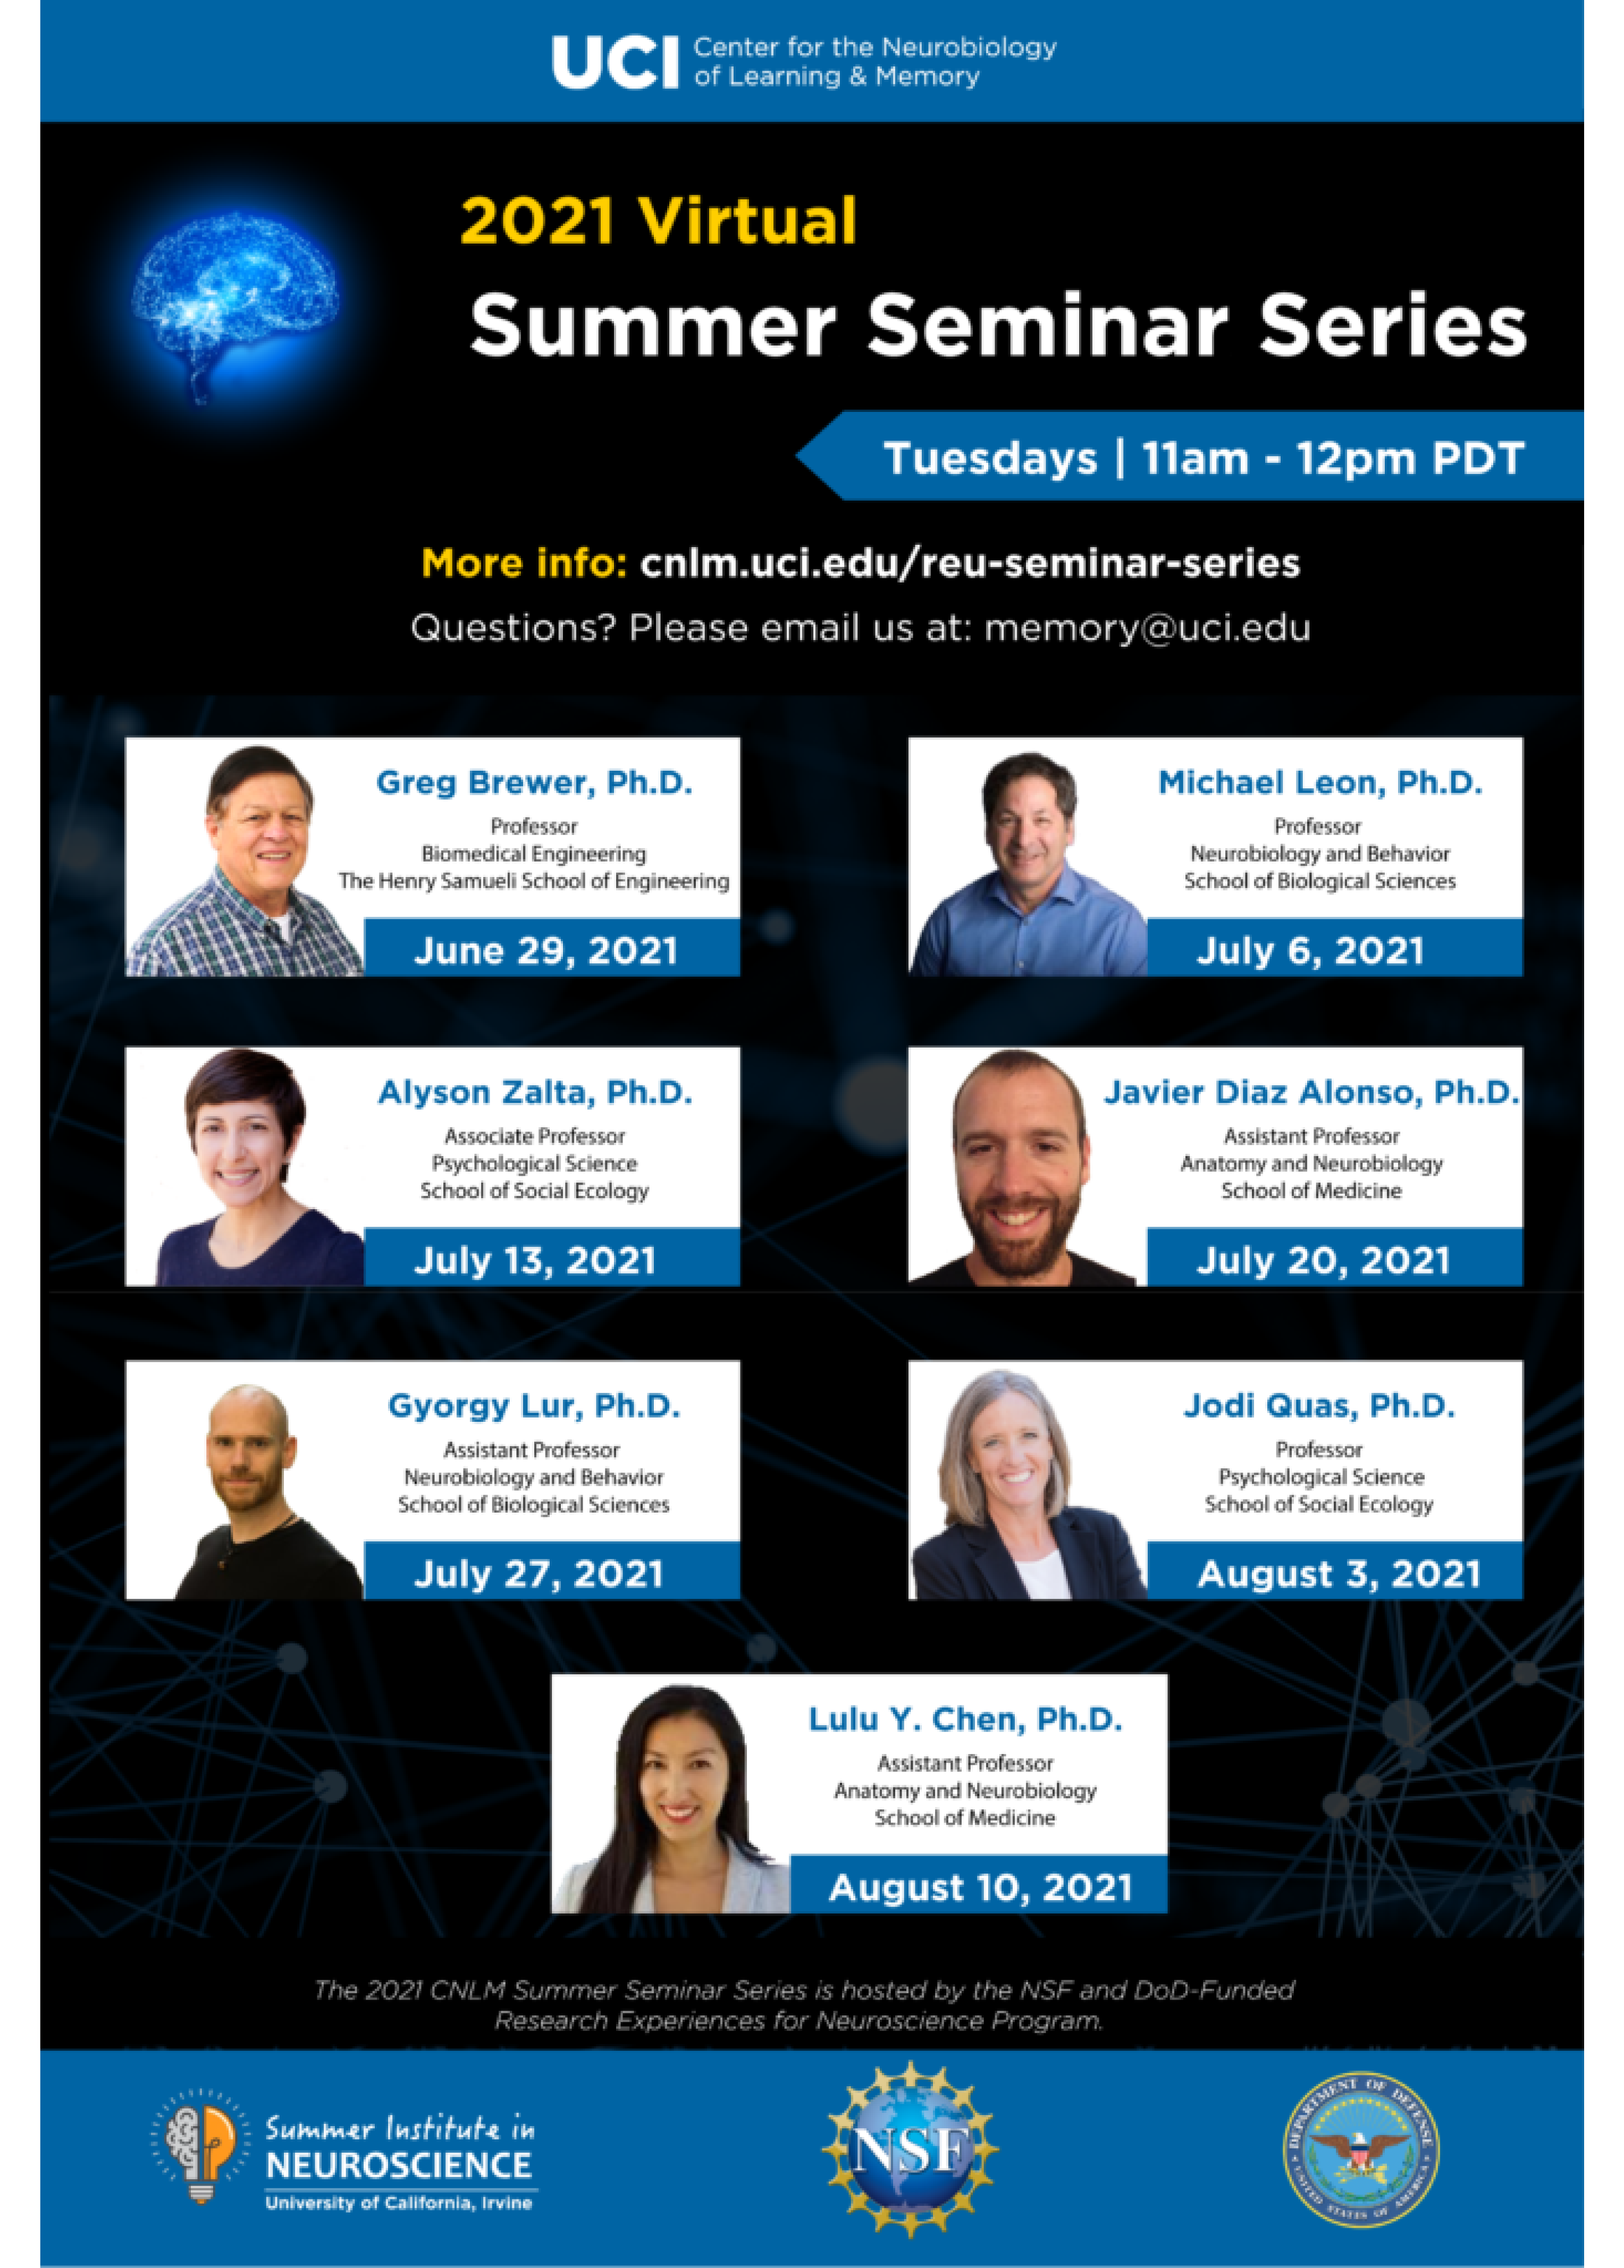 2021 Virtual Summer Seminar Series - speakers pictured to discuss UCI Brain Research and Current research in neuroscience